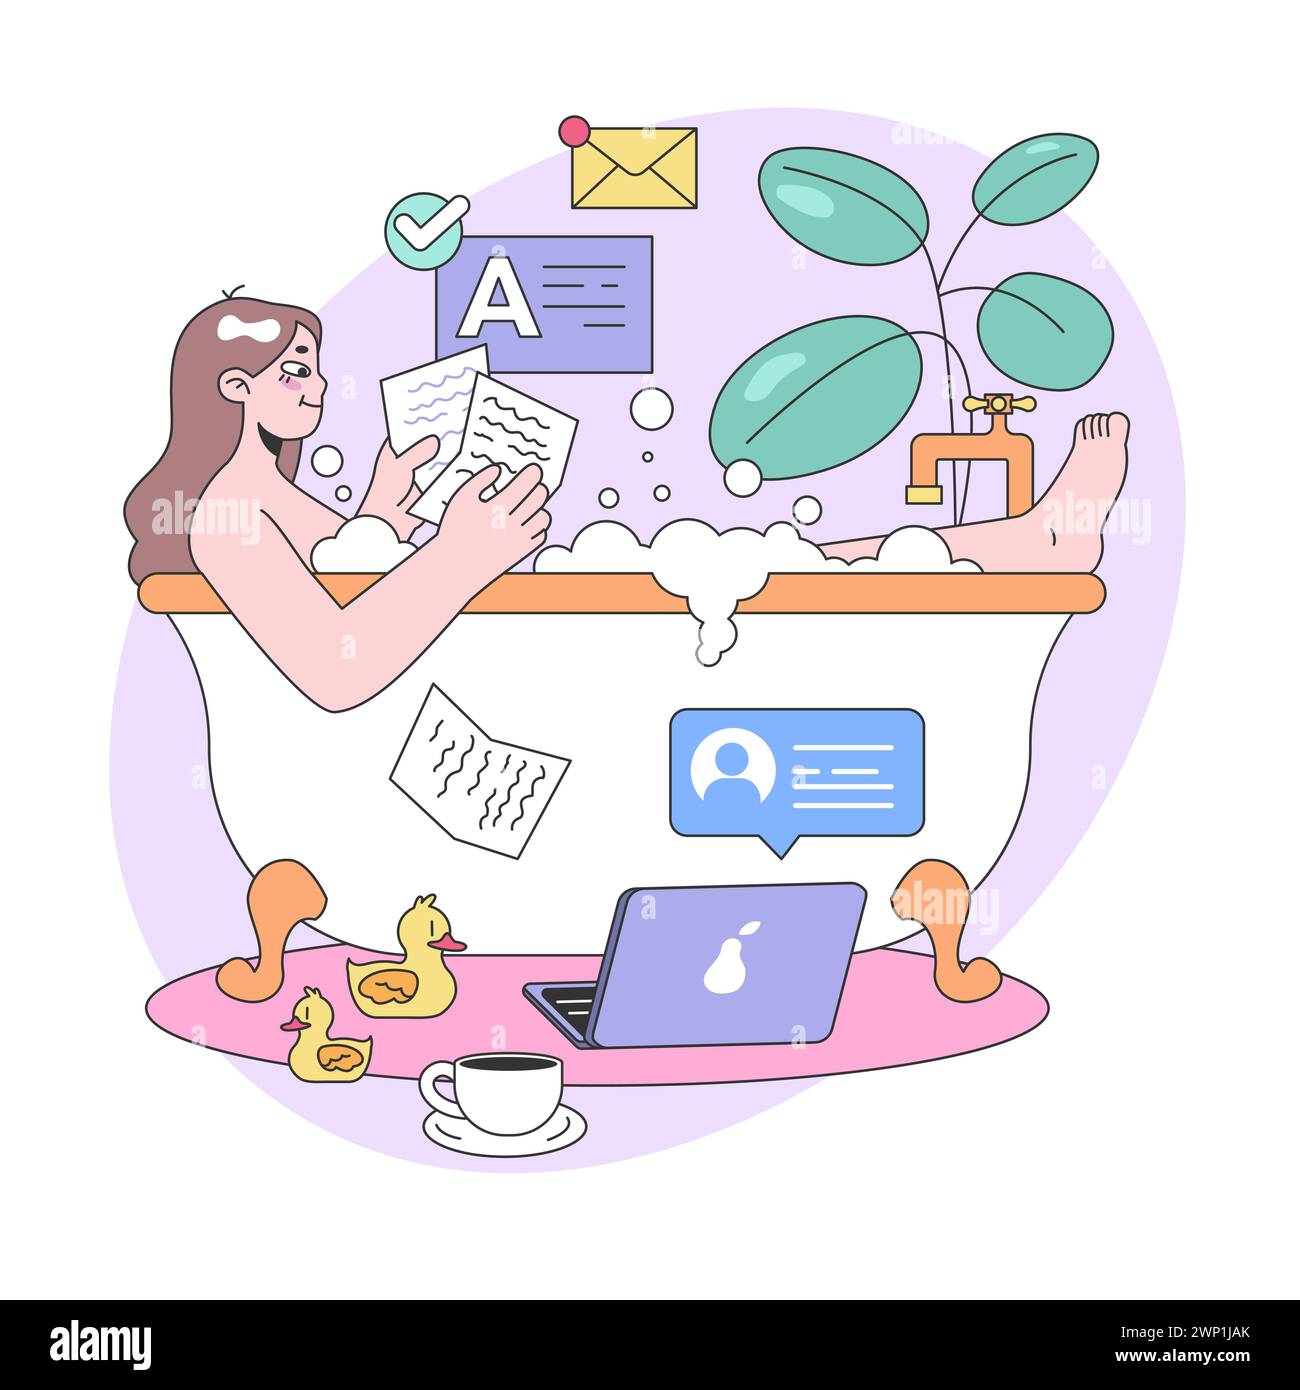 Relaxing work-from-home concept. Woman enjoys a bath while reading papers, laptop on standby, surrounded by cute rubber ducks. Modern multitasking in comfort. Flat vector illustration Stock Vector